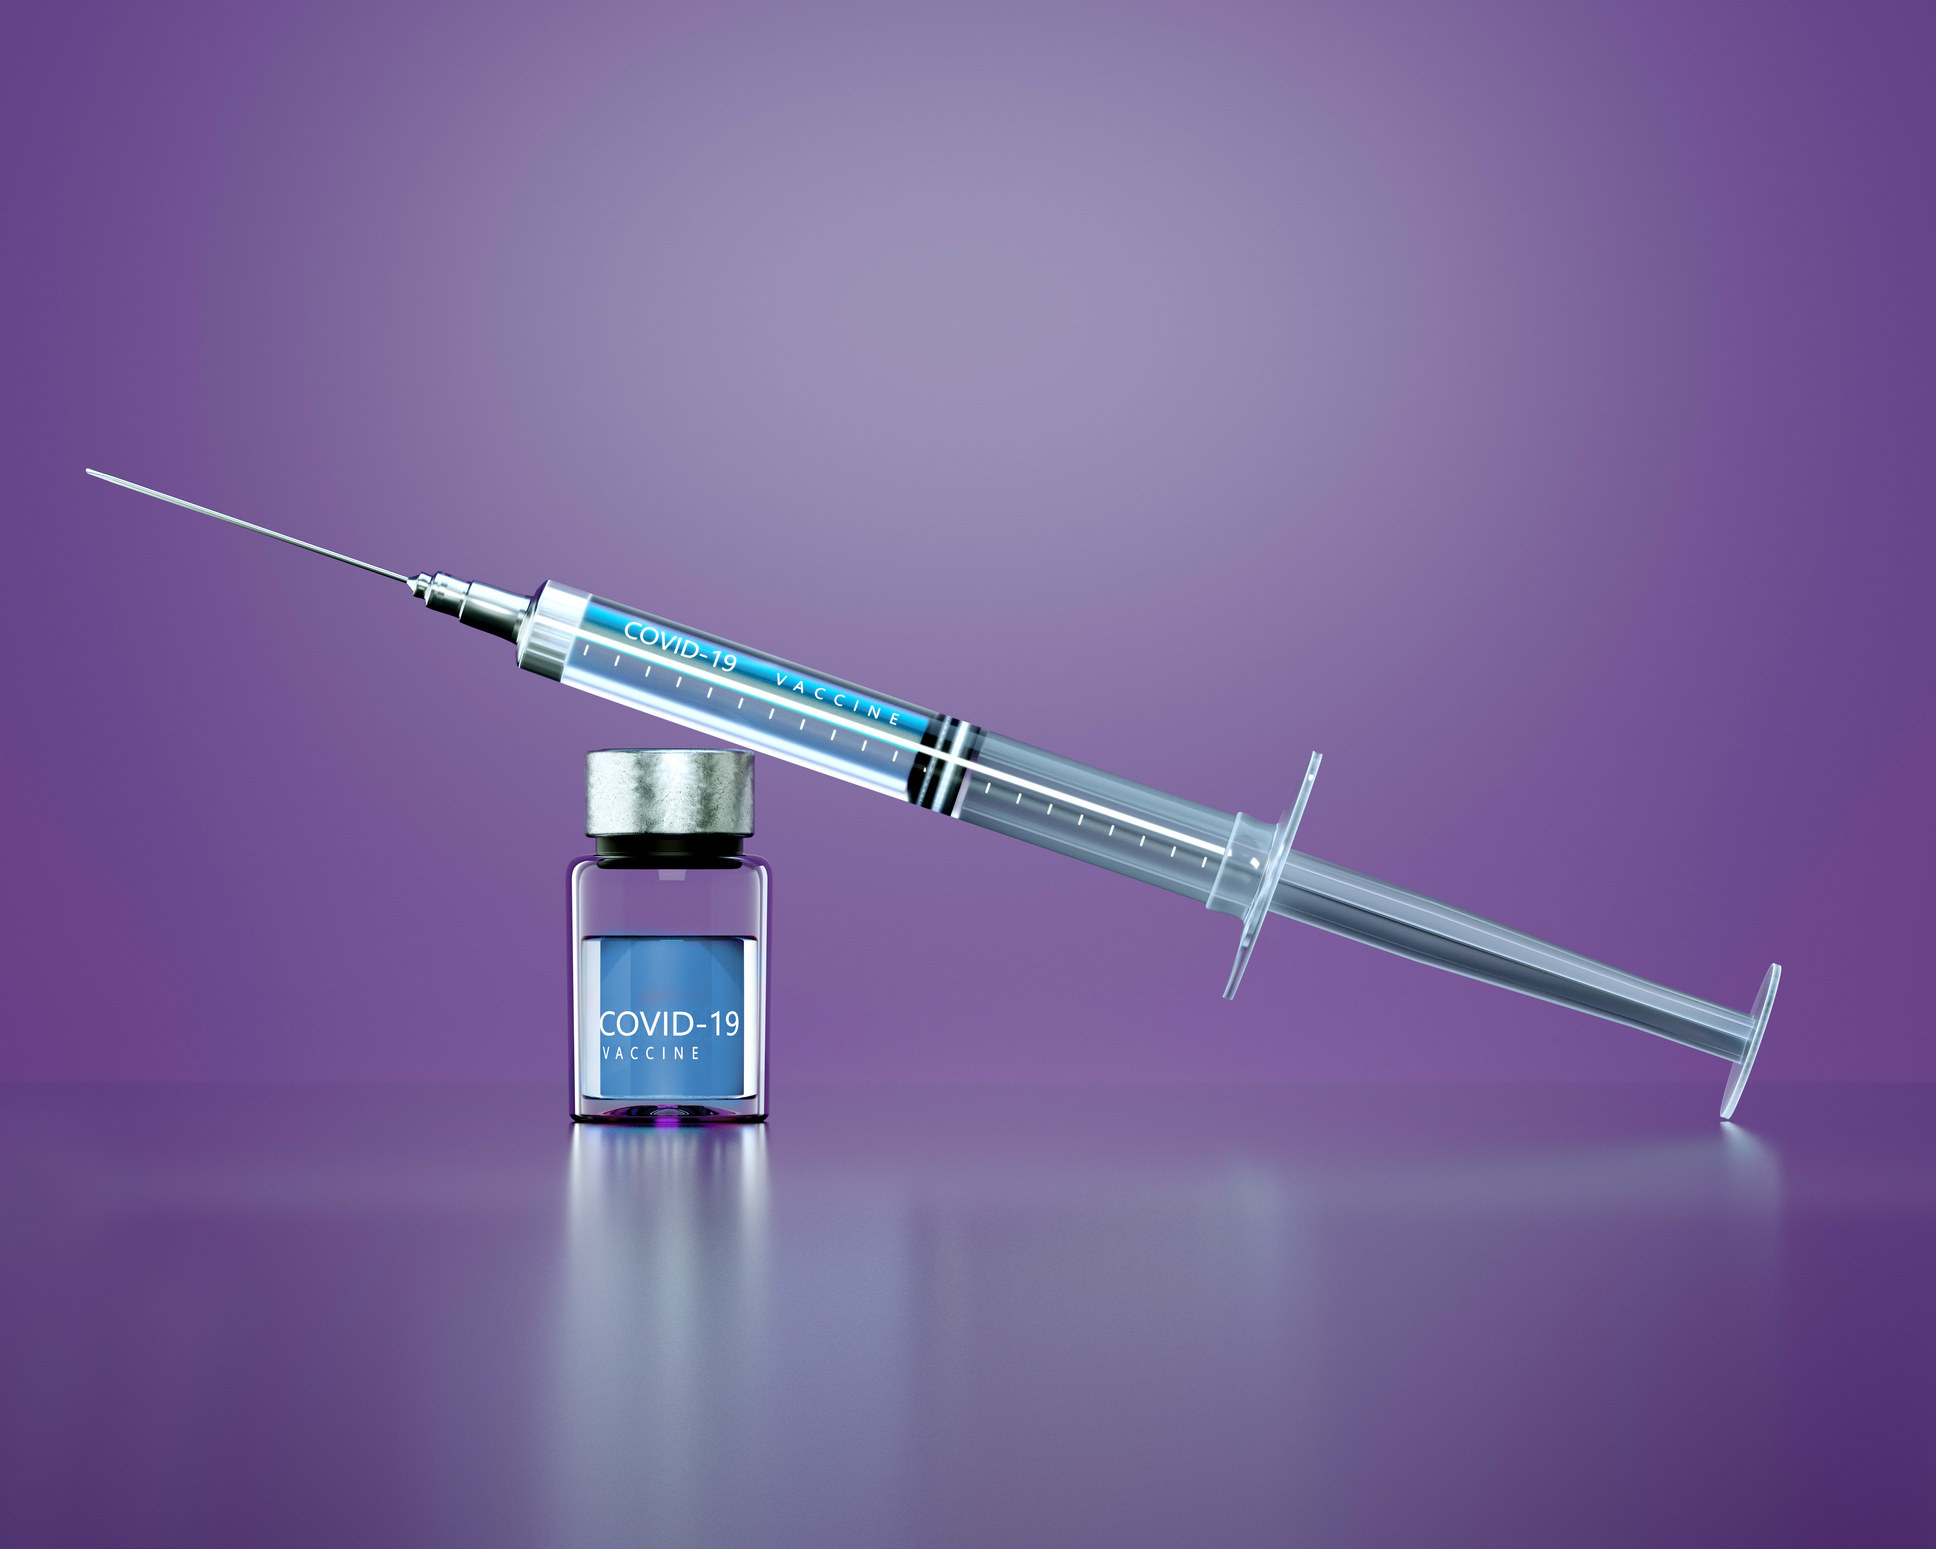 A syringe on top of a bottle labeled COVID-19 Vaccine